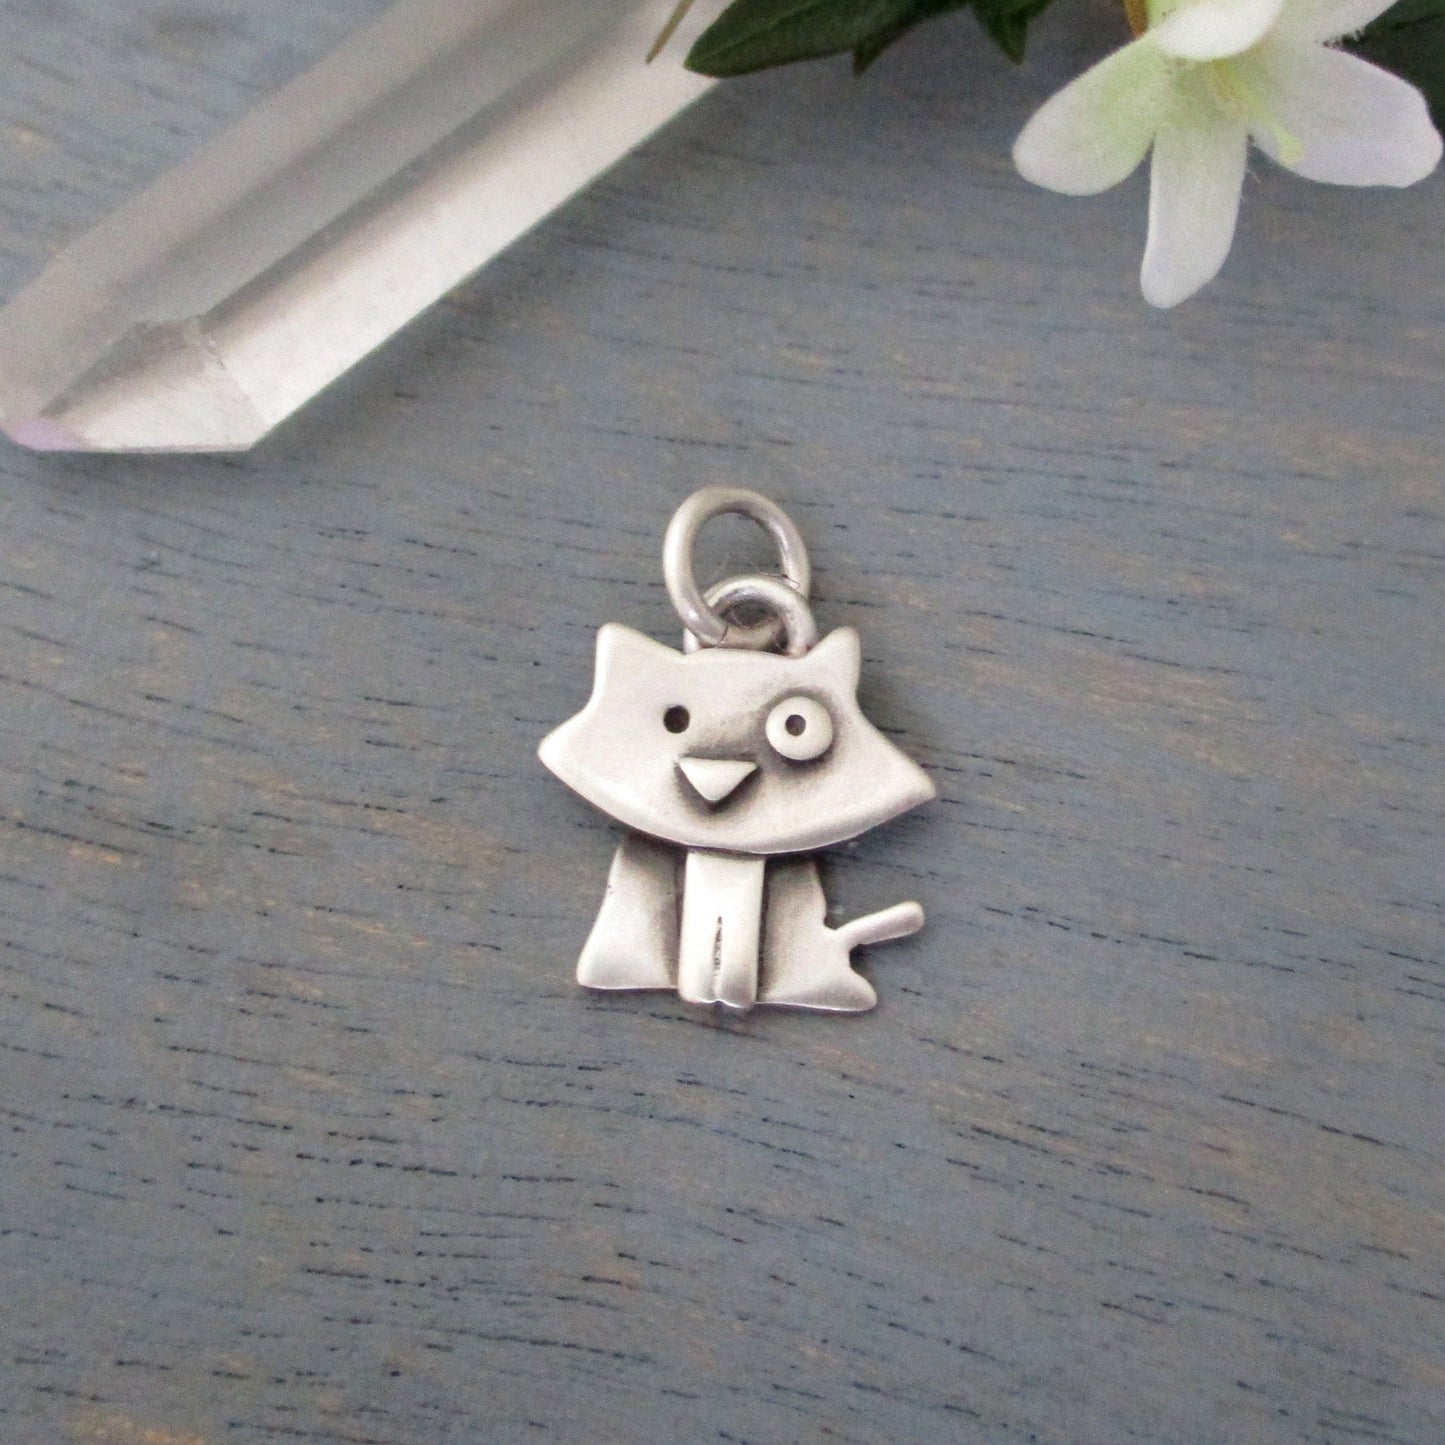 Felix the Cat Pendant in Sterling Silver, Cat Lover's Jewelry, Cat Charm, Cat Jewelry, Cat Pendant, Cat Remembrance Charm